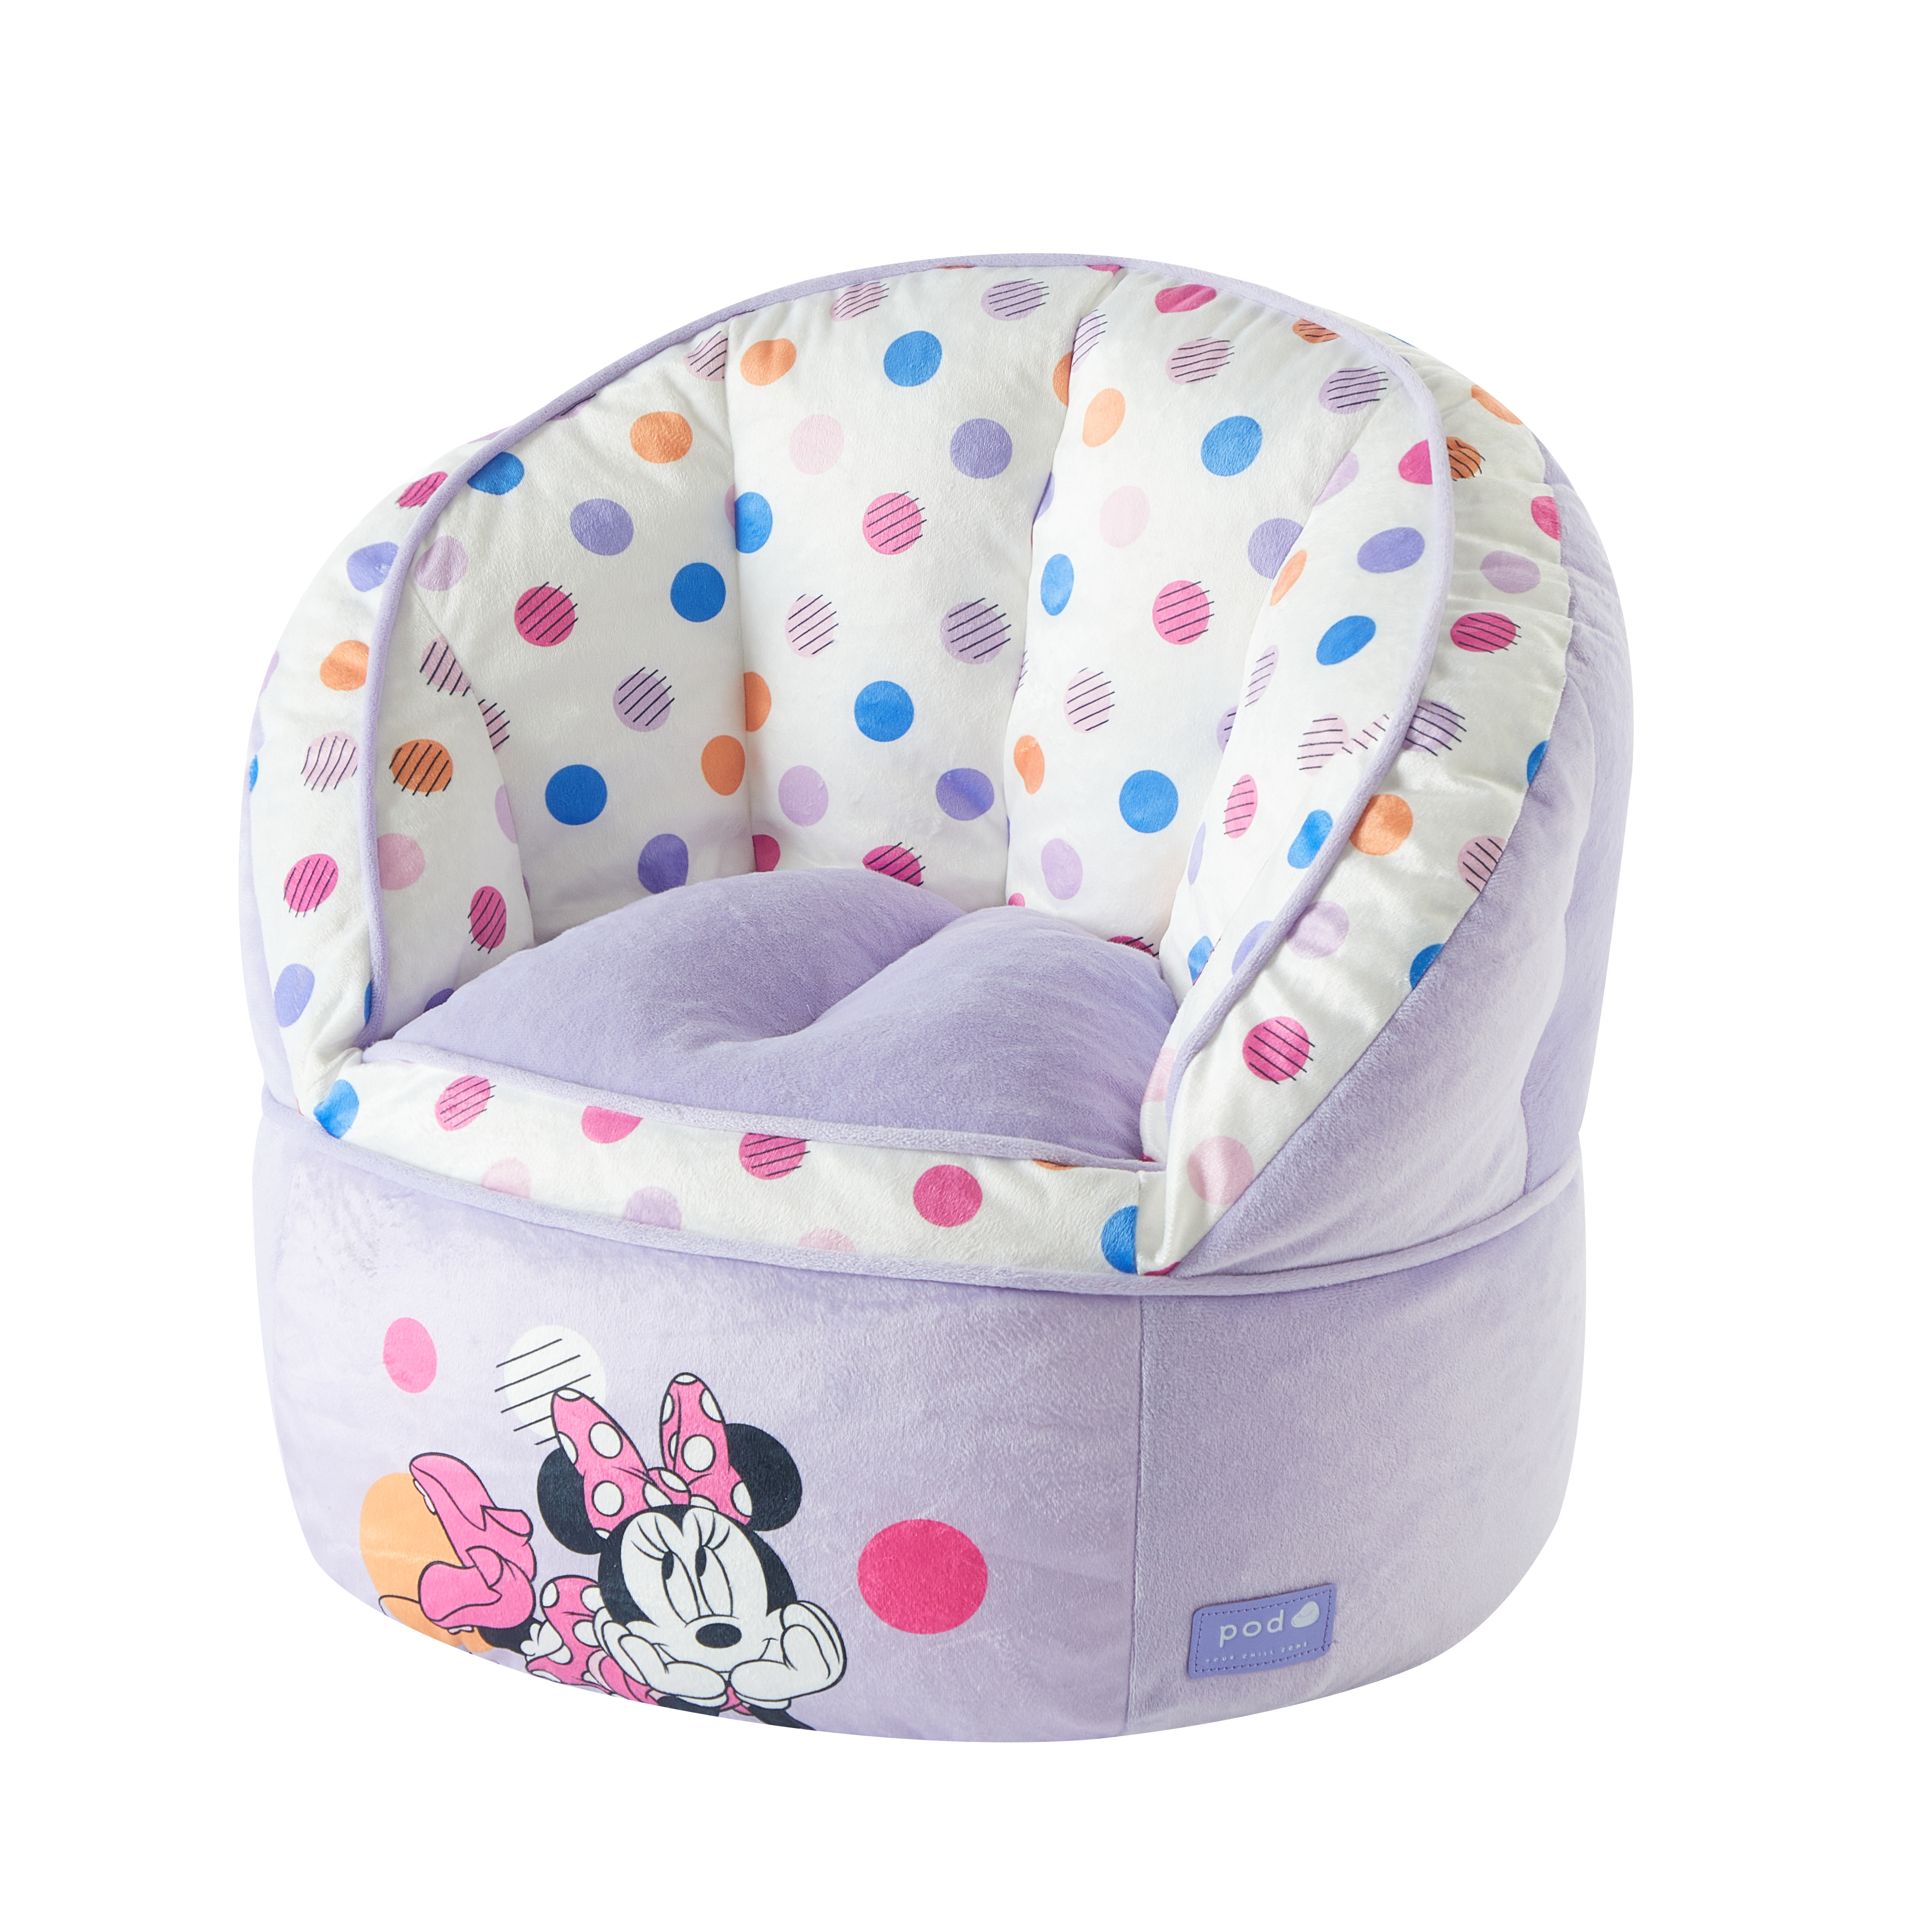 Disney Minnie Mouse Purple Polyester Bean Bag Chair - image 3 of 8